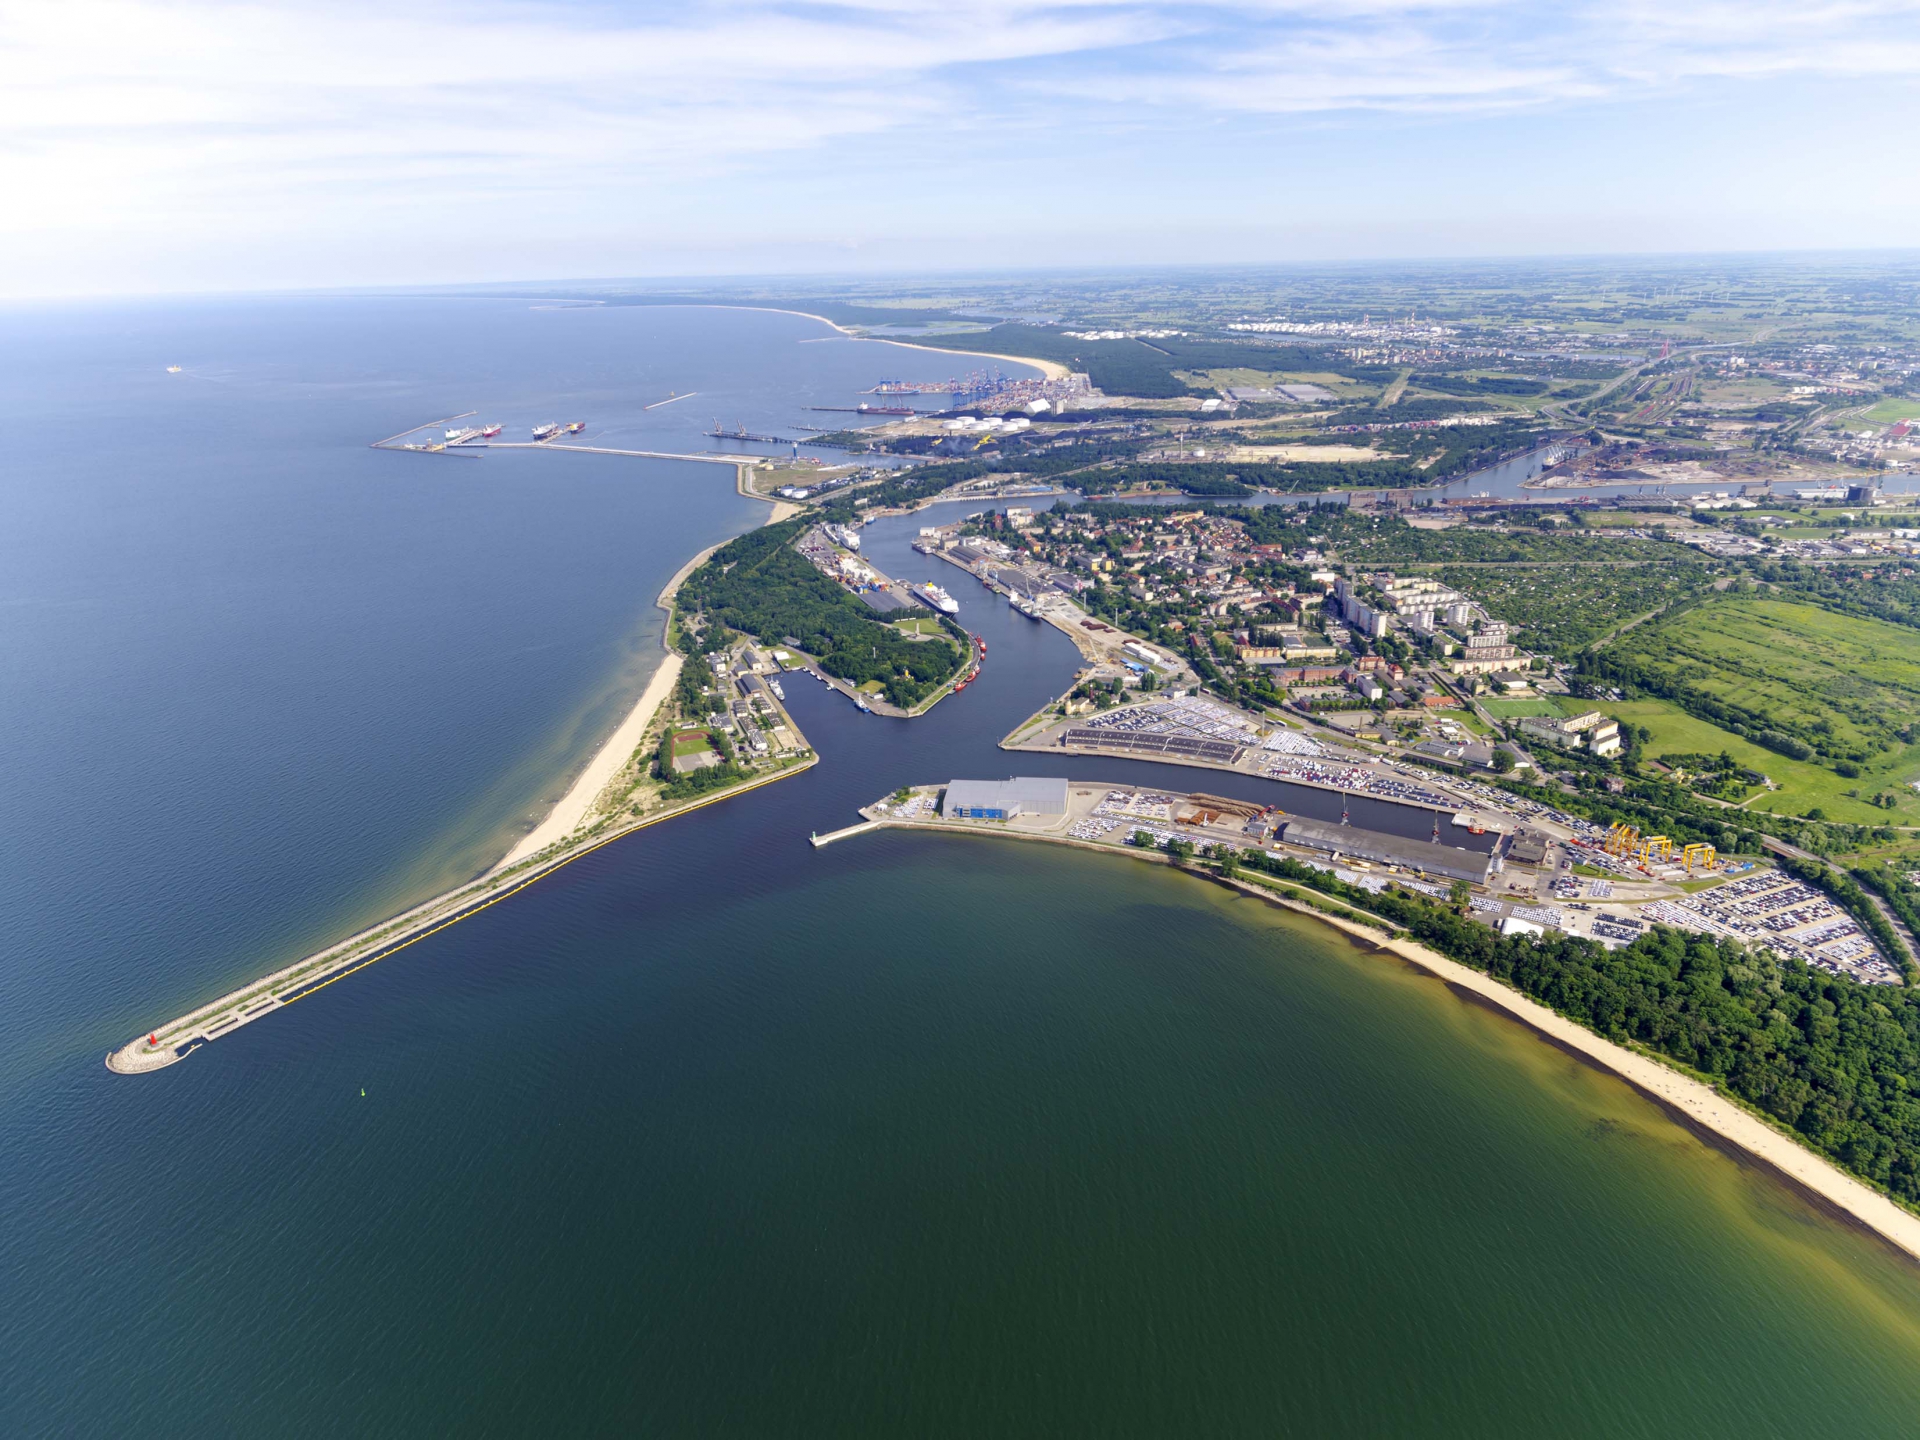 The Port of Gdansk is becoming one of the leading European ports - MarinePoland.com